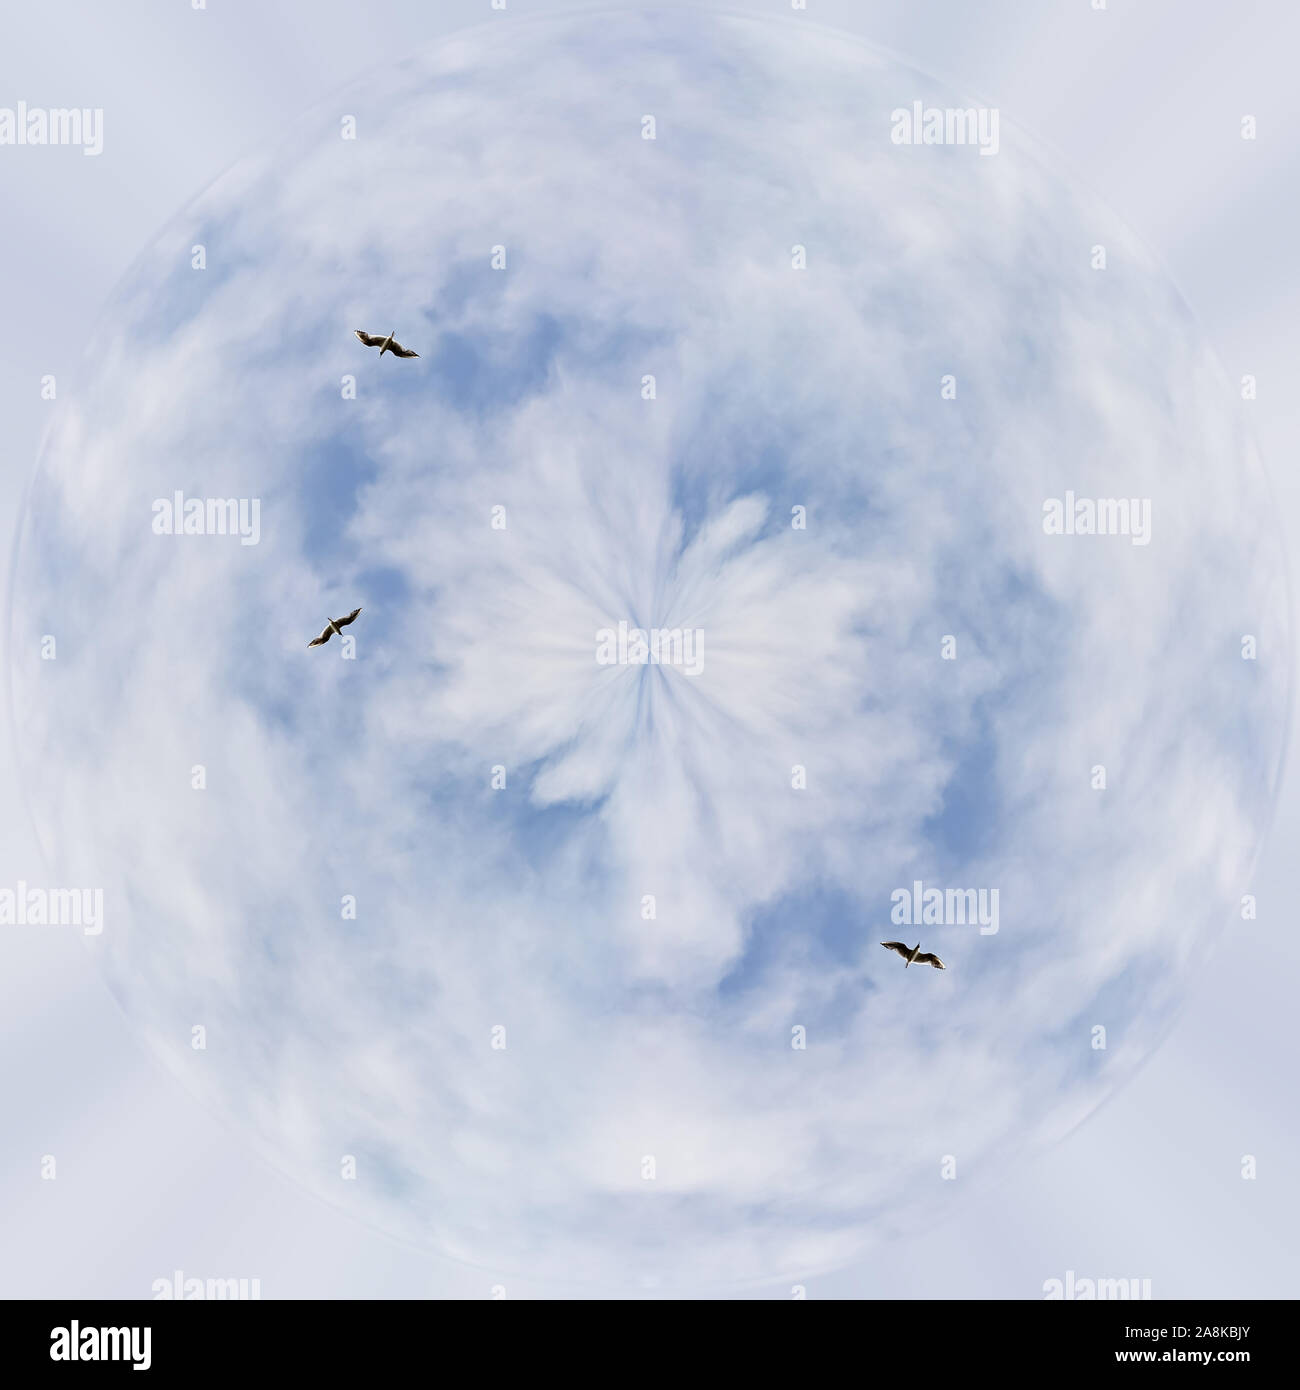 Blue planet in white clouds. Seagulls fly Stock Photo